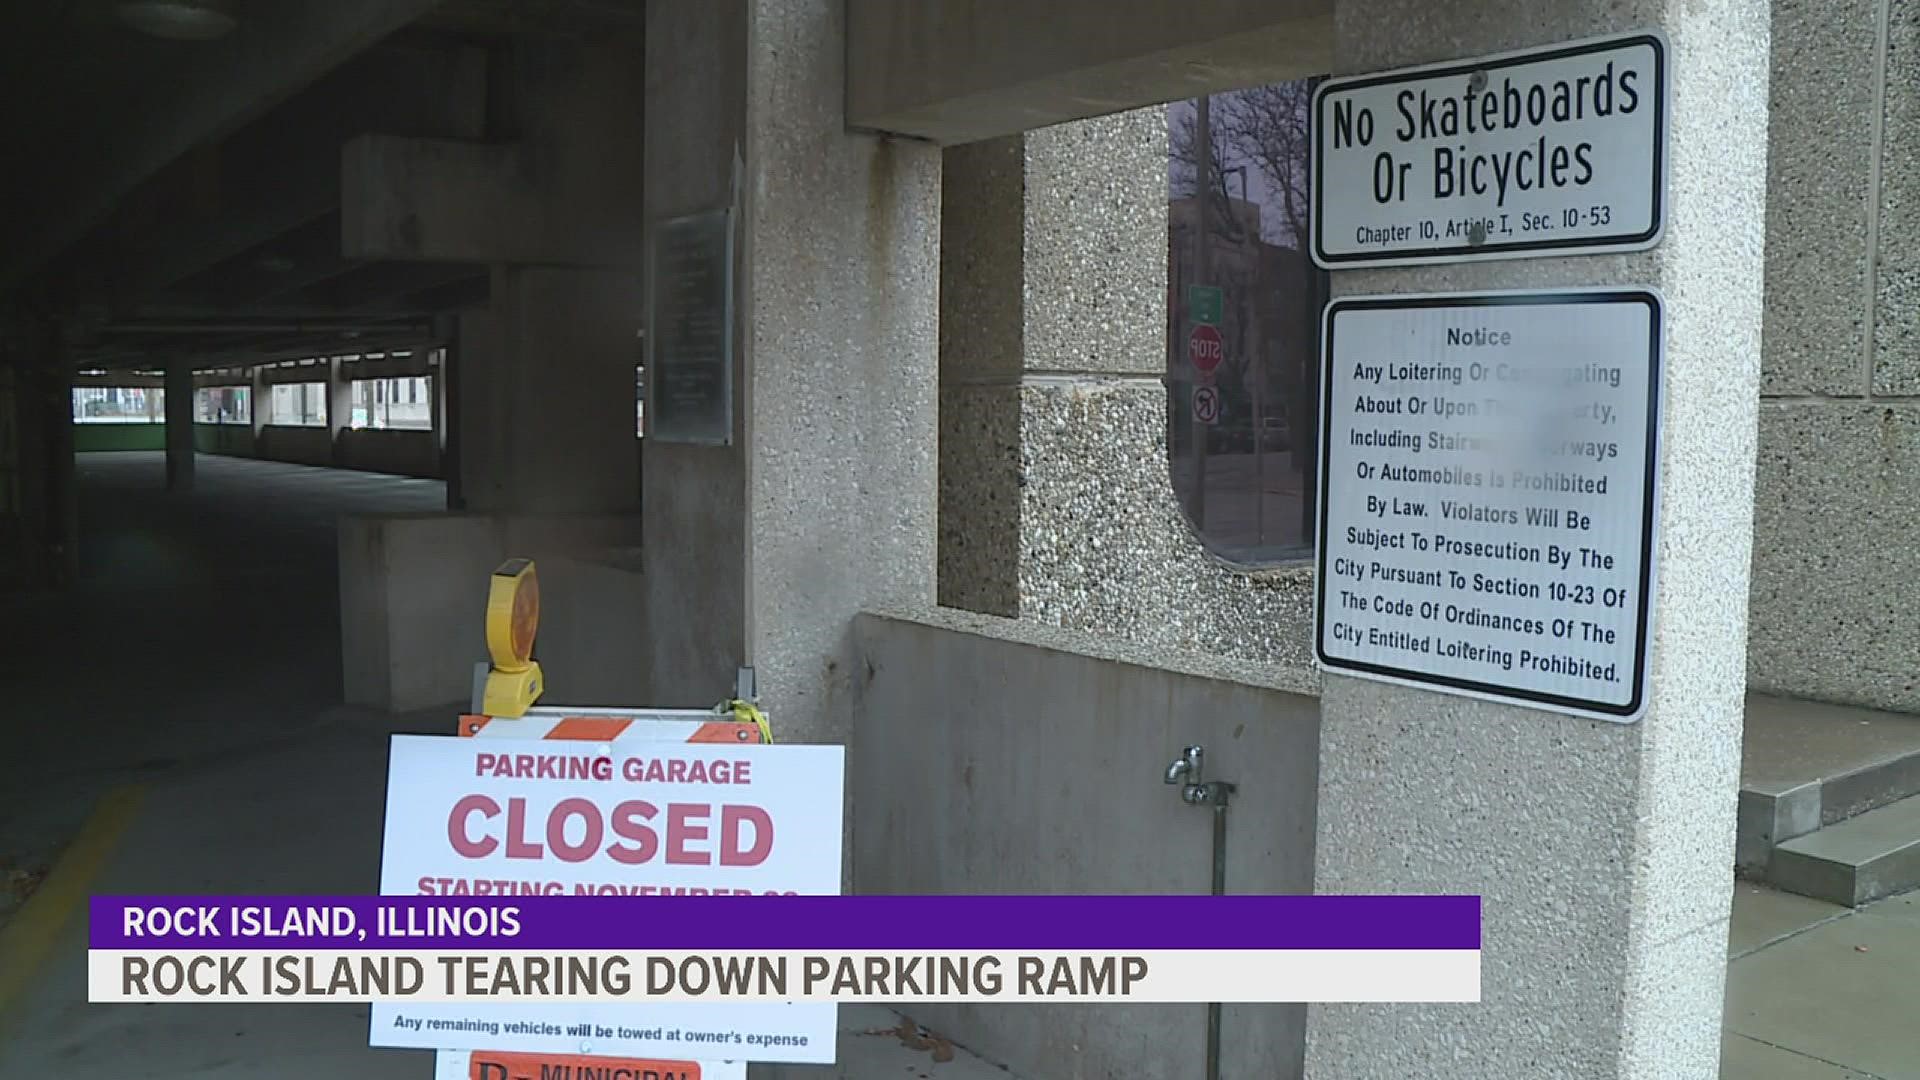 The ramp closed at 3p.m. Nov. 27 and will be demolished on Nov. 28.